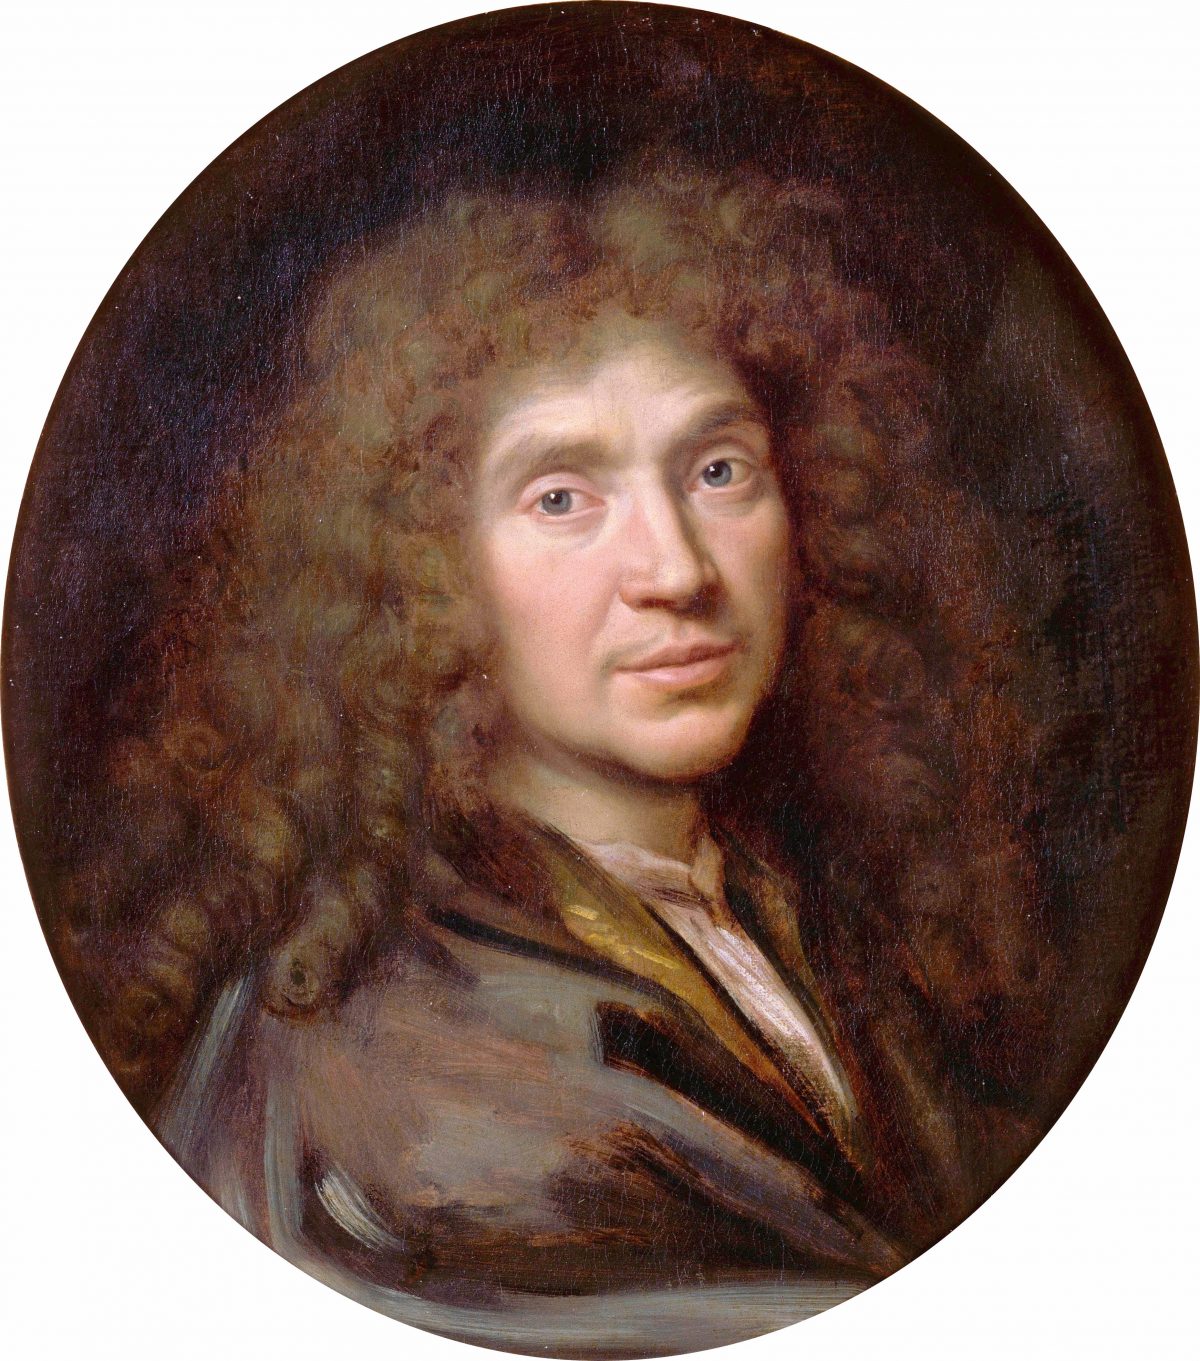 Molière, original name Jean-Baptiste Poquelin, (1622 – 1673) was considered the greatest of all writers of French comedy
